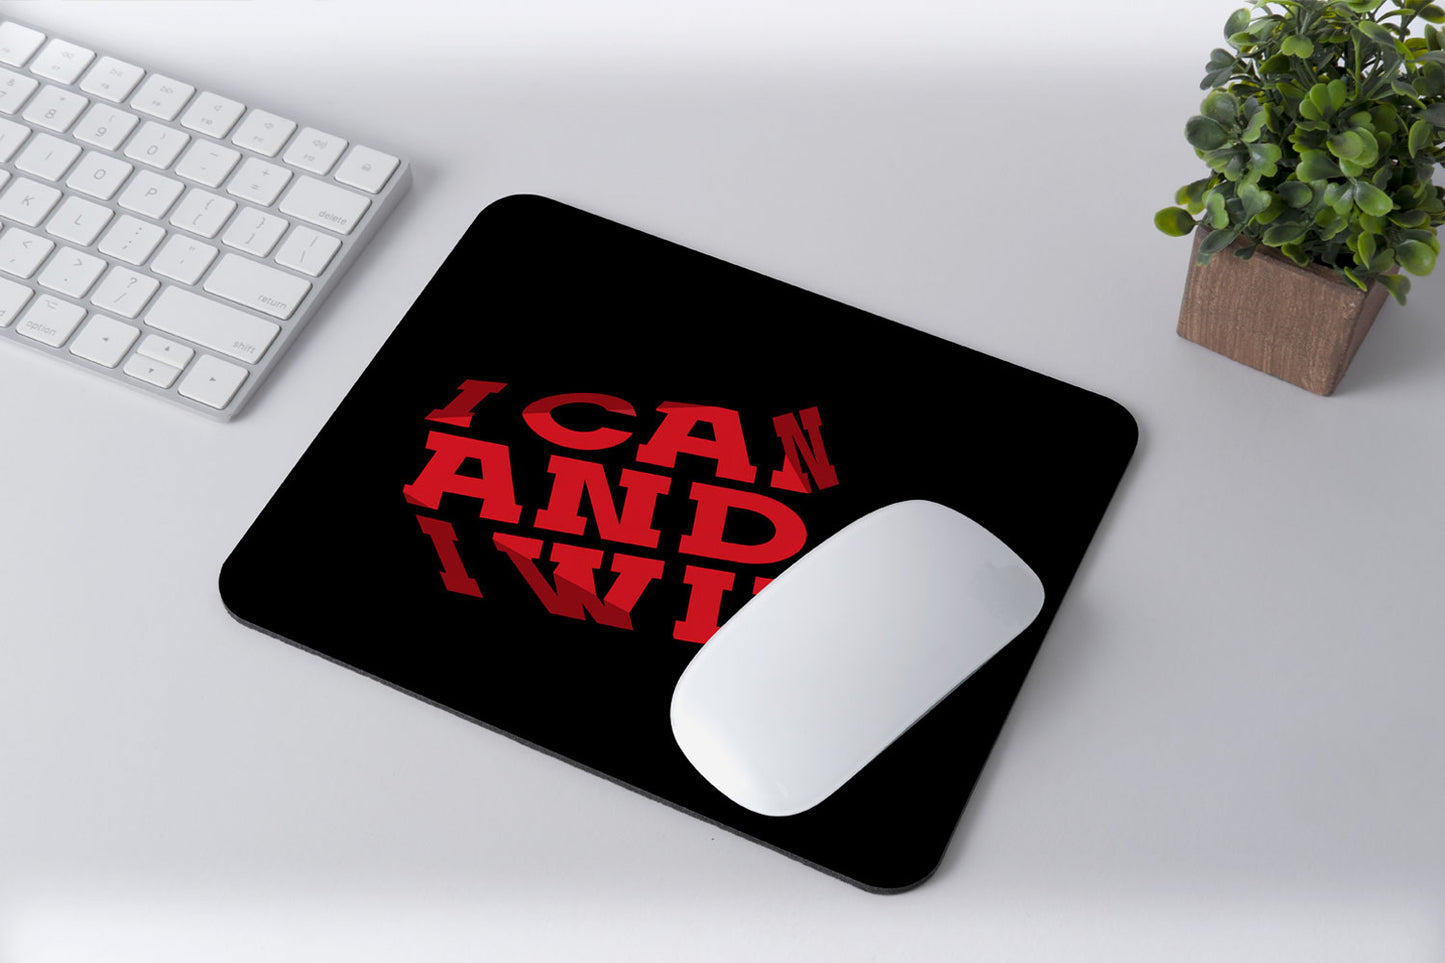 Modest City Beautiful 'I Can And i Will' Printed Rubber Base Anti-Slippery Motivational Design Mousepad for Computer, PC, Laptop_002